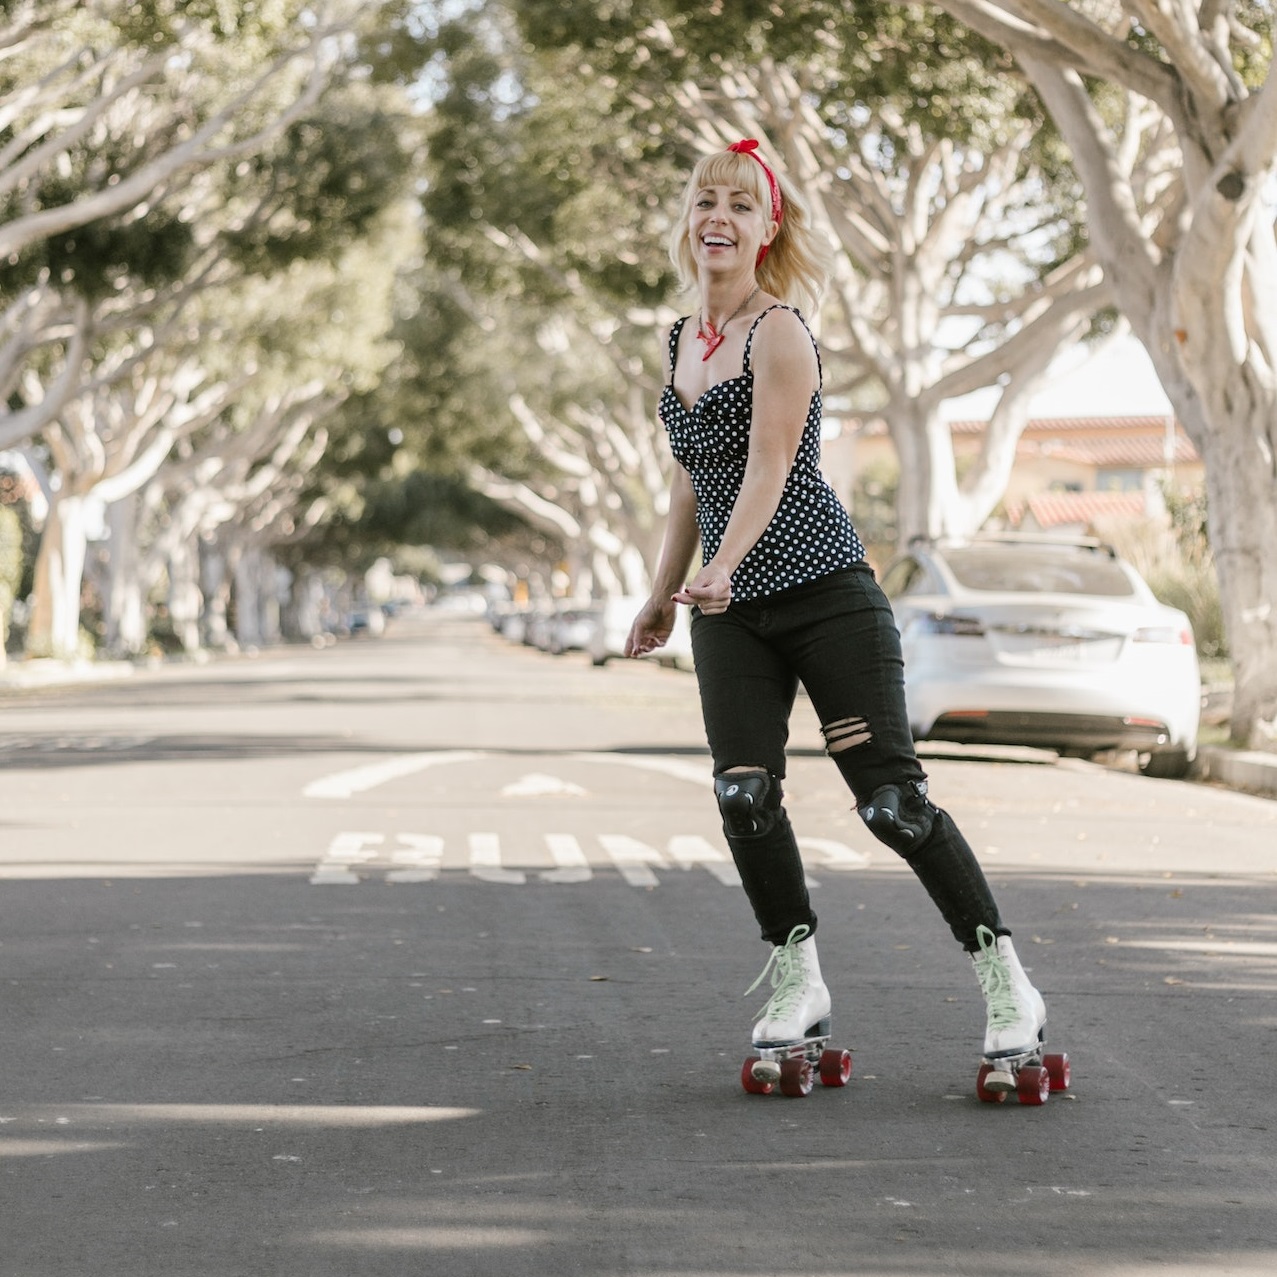 cheerful-woman-rollerskating-down-an-outdoor-street-in-warm-weather-on-affordable-retro-roller-skates